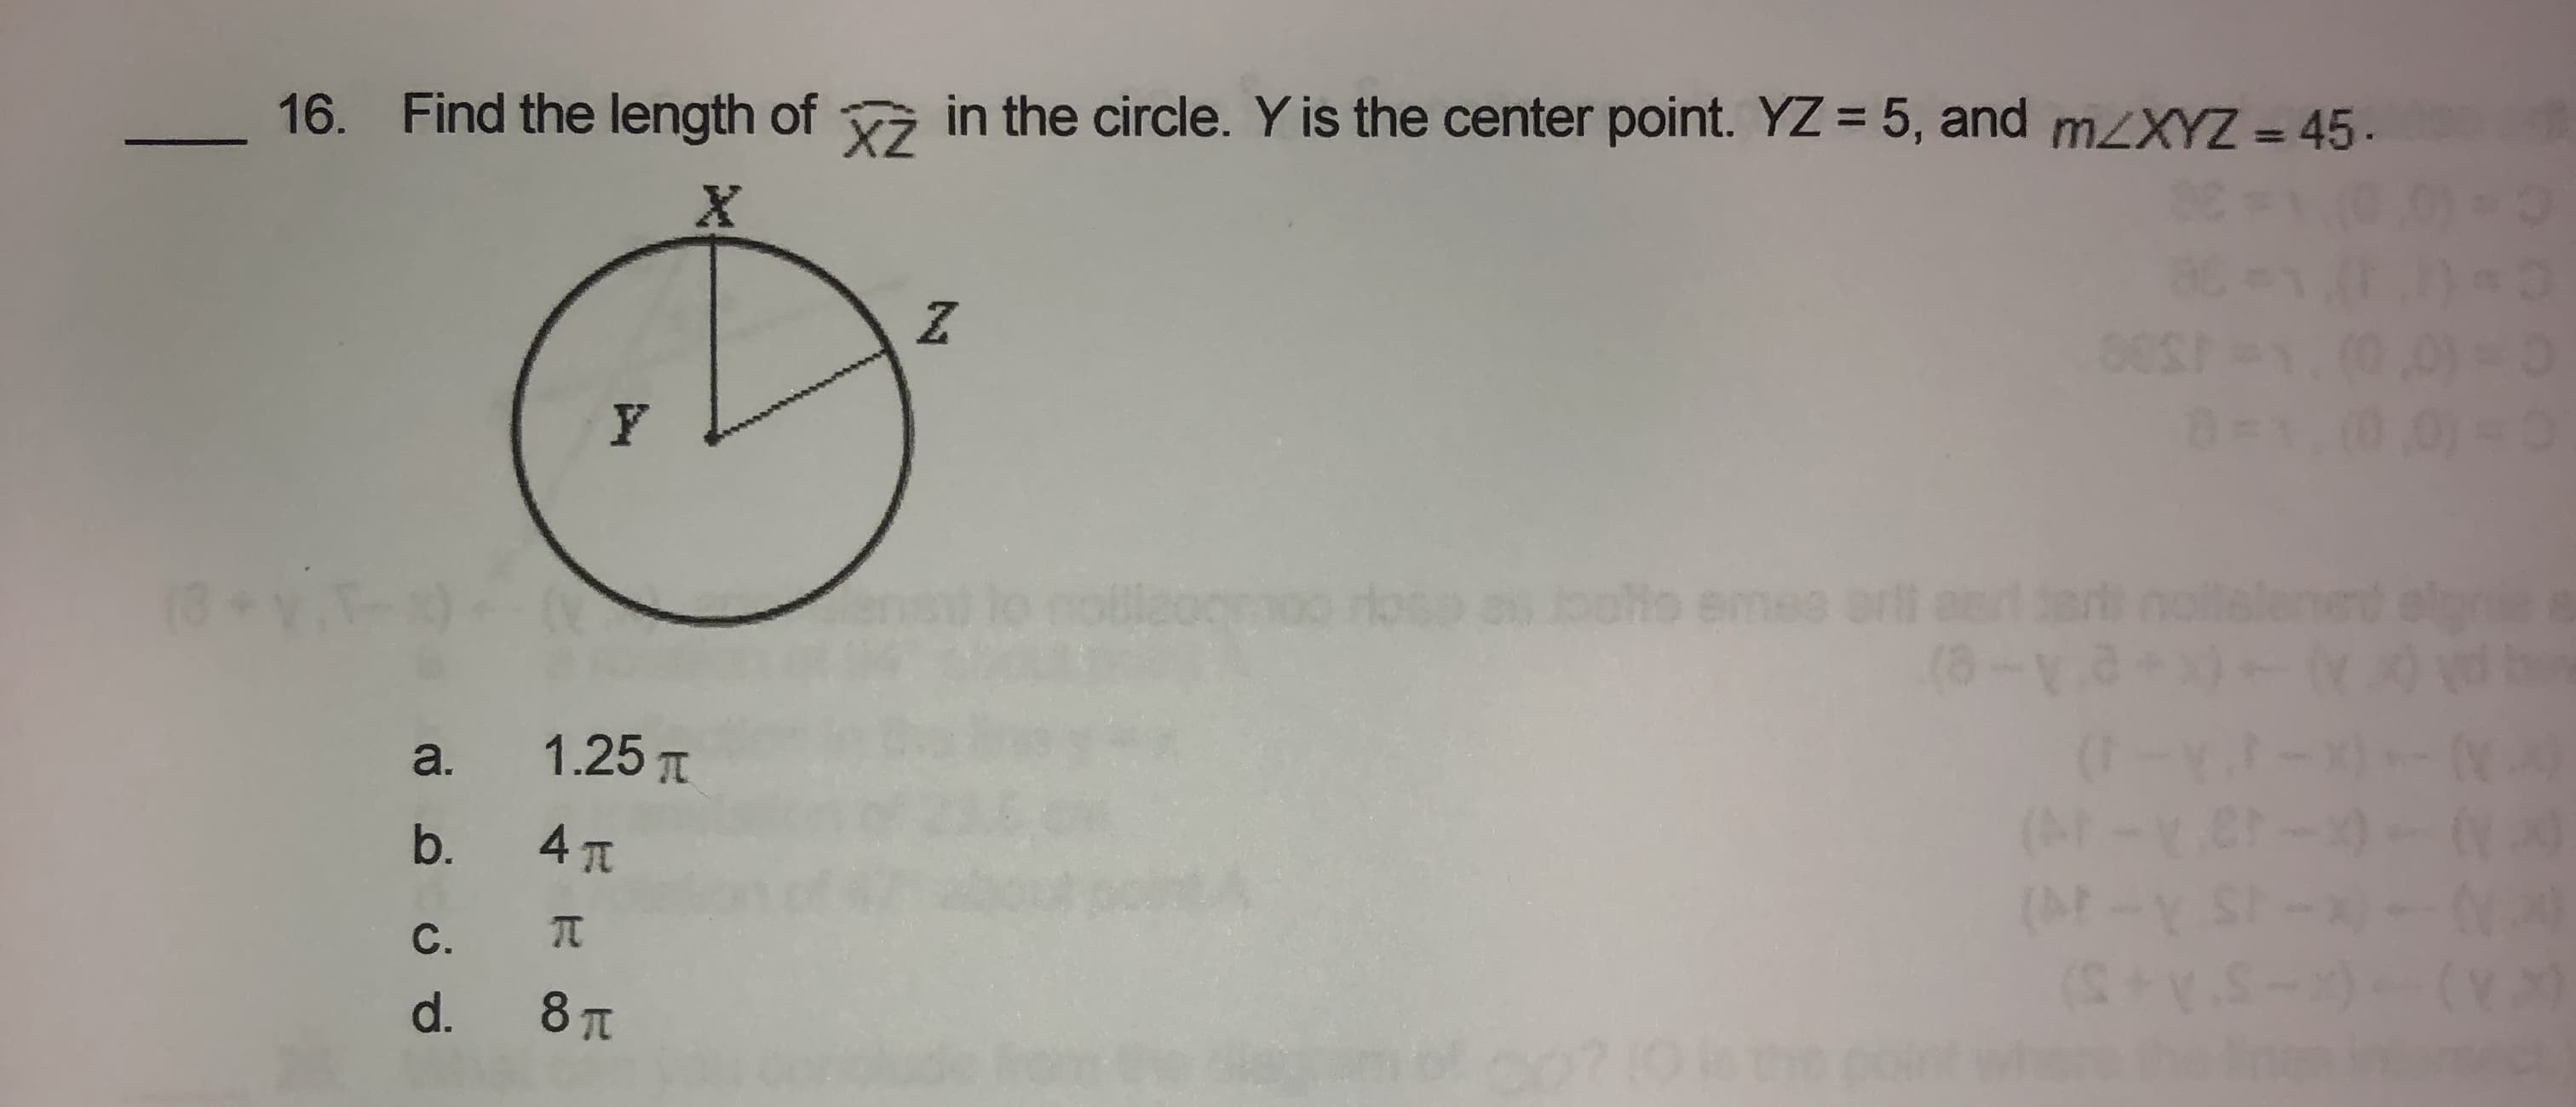 16. Find the length of in the circle. Y is the center point. YZ = 5, and MLXYZ = 45.
%3D
rloso
eme
nollelenen
